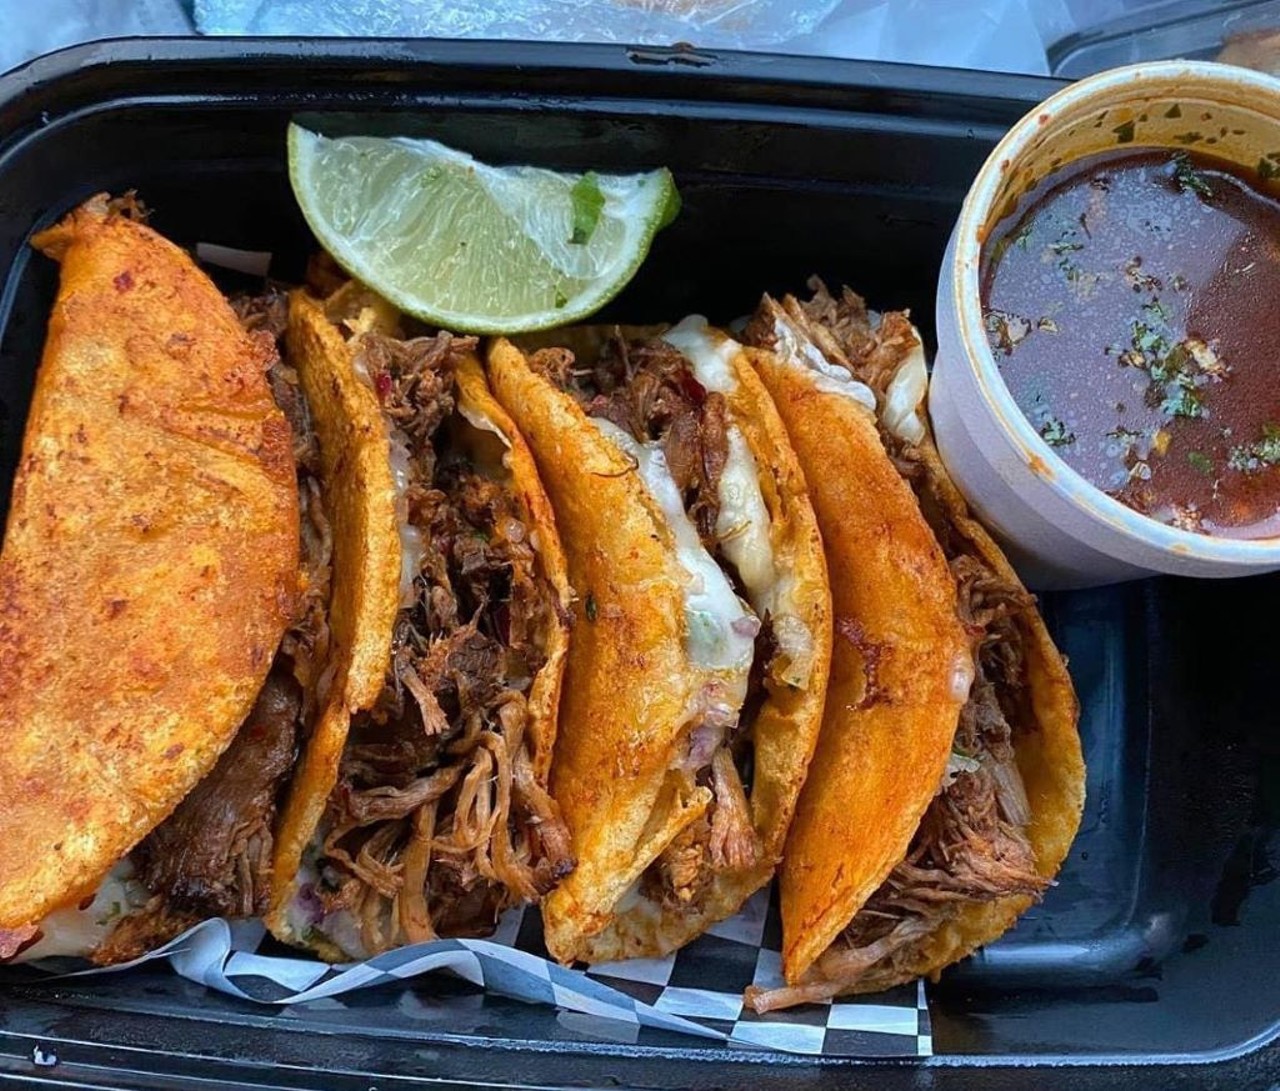 La Eskinna  
1826 Saturn Blvd.
&#148;Made with love from Mexico&#148; but centered on the heart of Orlando, La Eskinna is the perfect spot for birria tacos and birria ramen. Check out their social media for updates on the days they&#146;re food truck is open. 
Photo via La Eskinna/Facebook